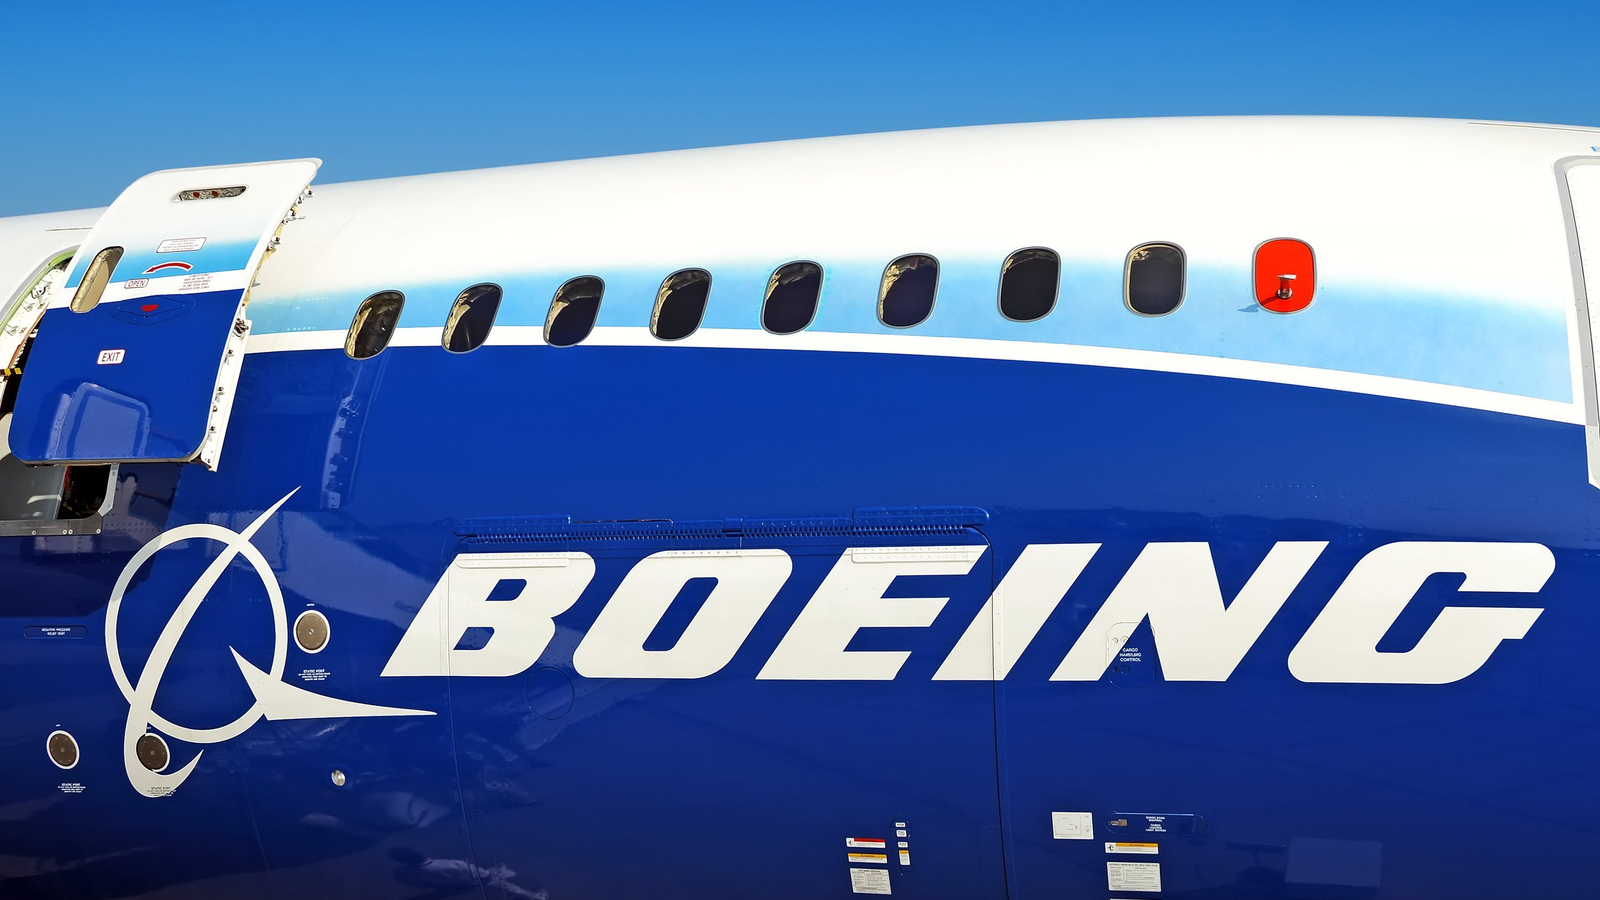 Boeing (BA stock) logo on the side of an airplane